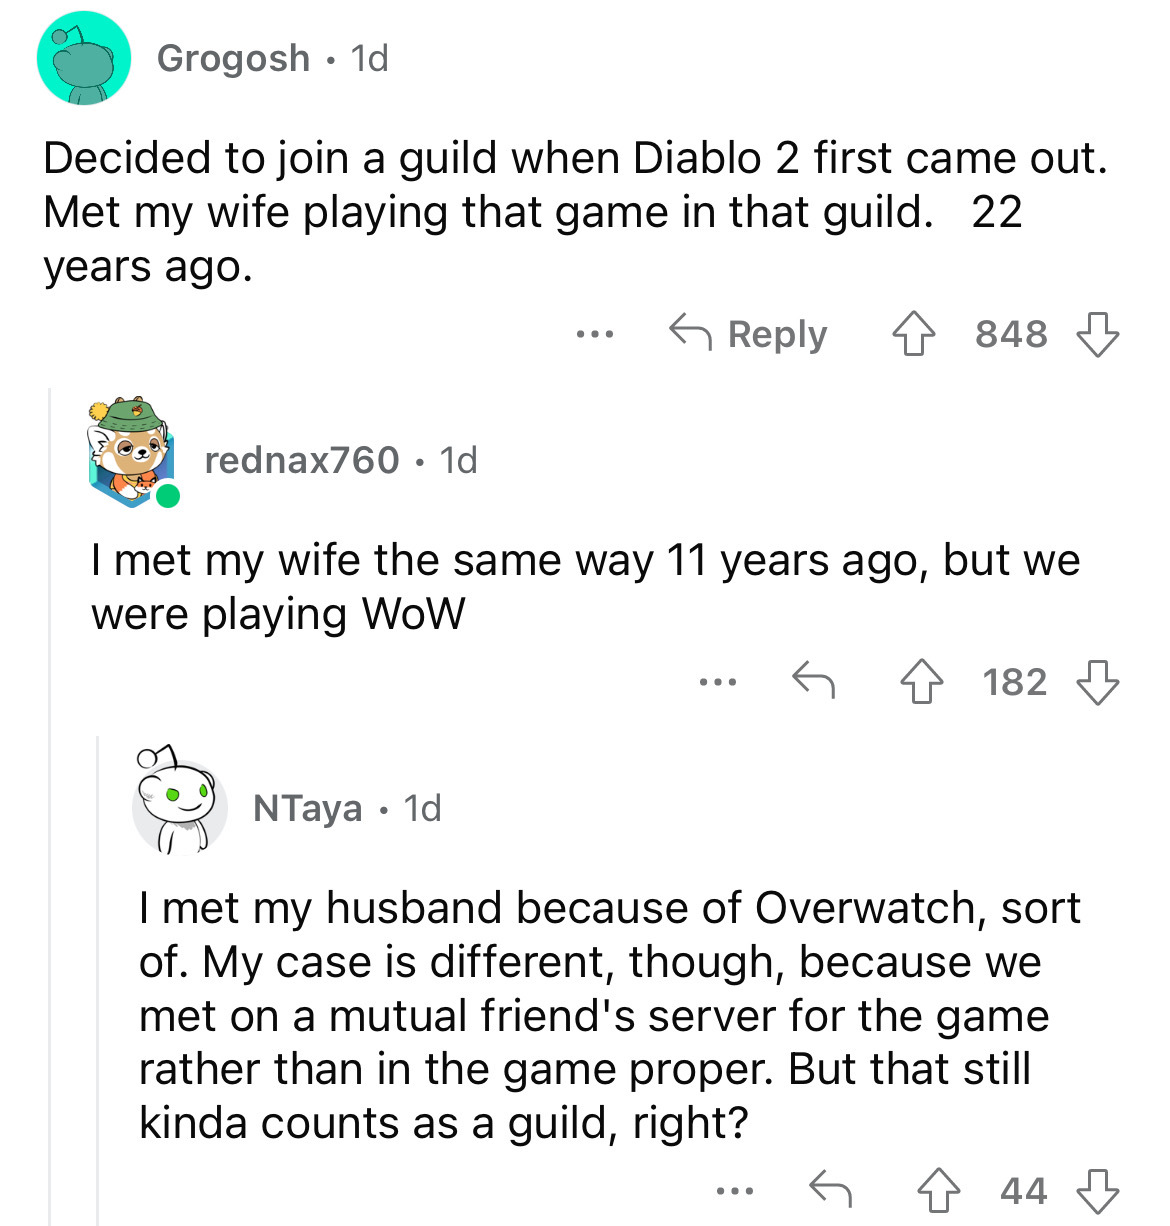 angle - Grogosh. 1d Decided to join a guild when Diablo 2 first came out. Met my wife playing that game in that guild. 22 years ago. 4848 rednax760 1d ... I met my wife the same way 11 years ago, but we were playing WoW 4182 ... NTaya 1d I met my husband 